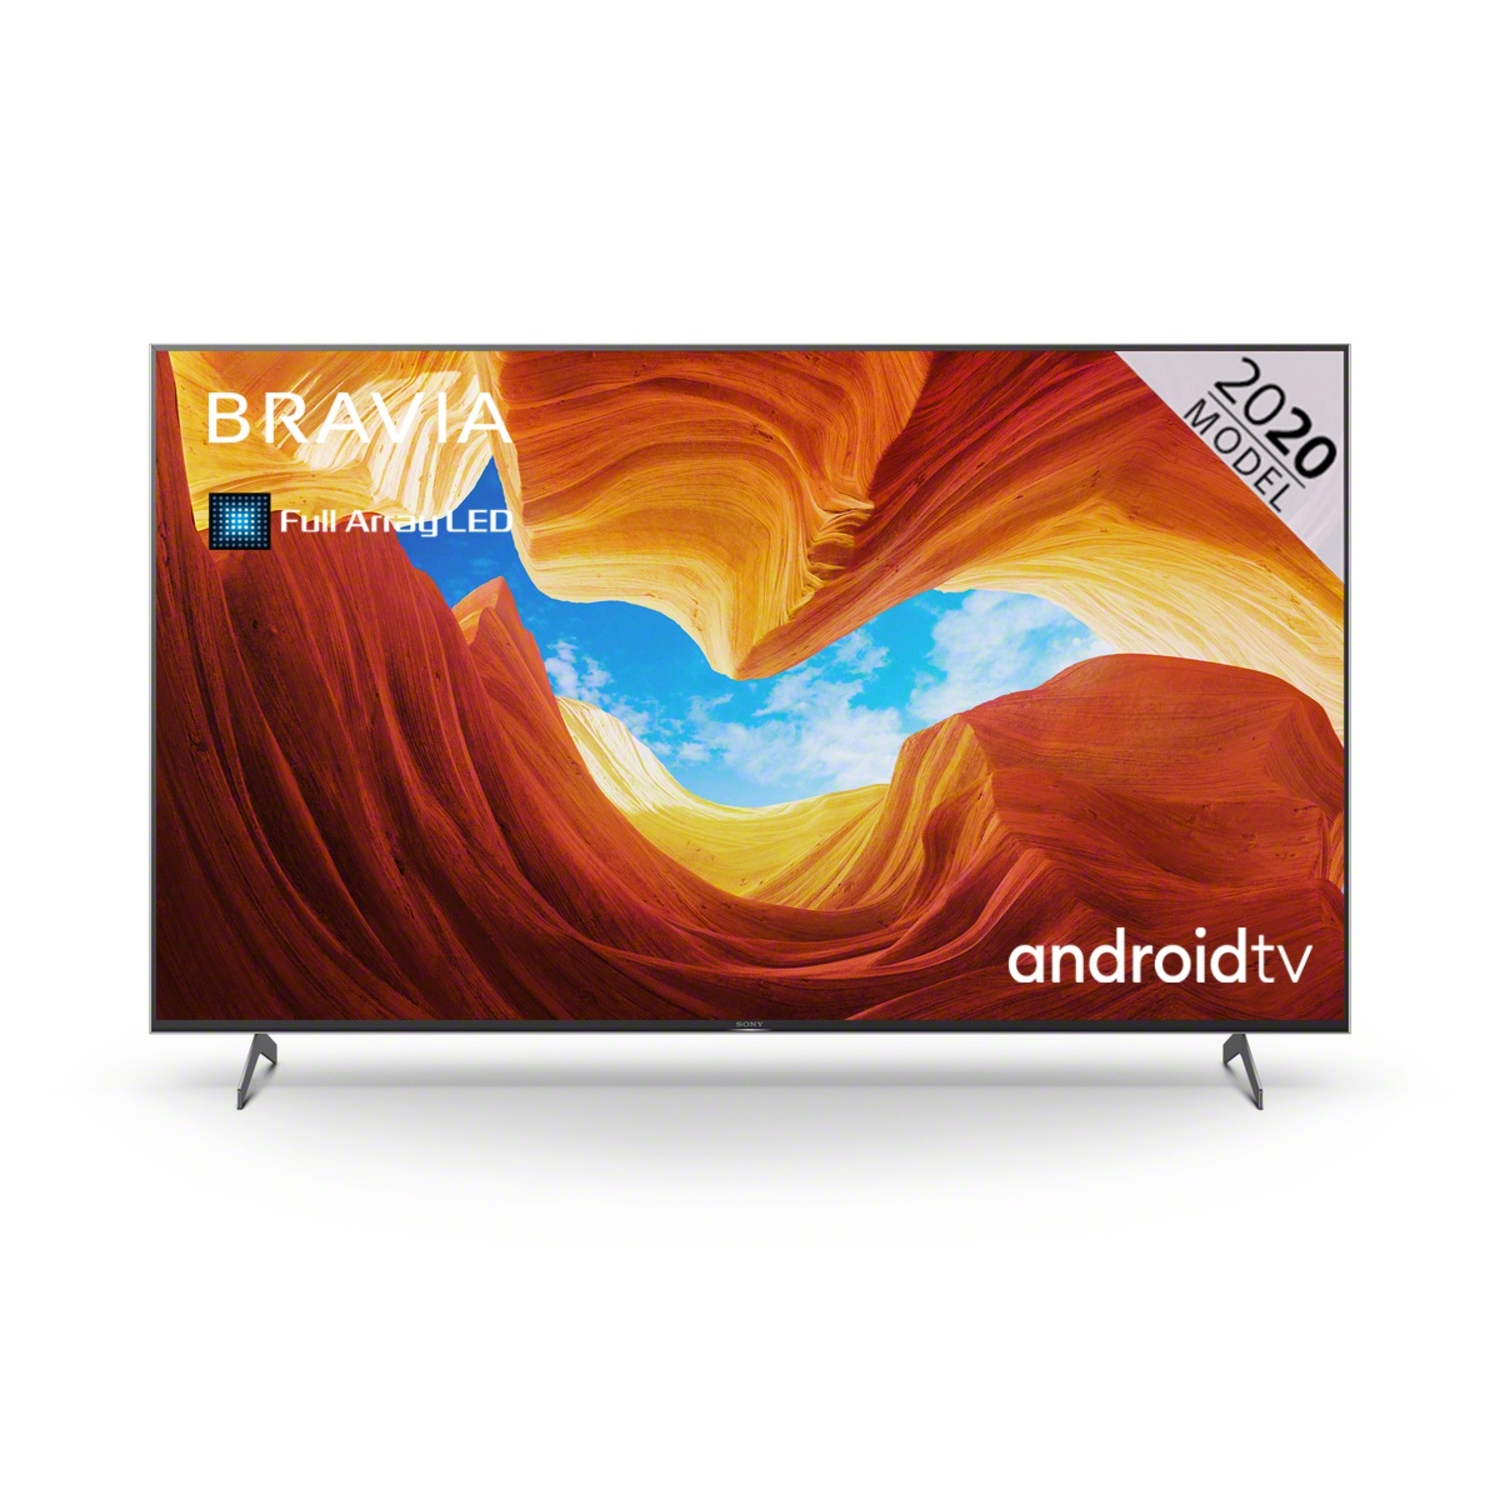 Sony KE55XH9005BU 55" 4K HDR Full Array LED Android TV with X-Motion Clarity &amp; Google Assistant - 6